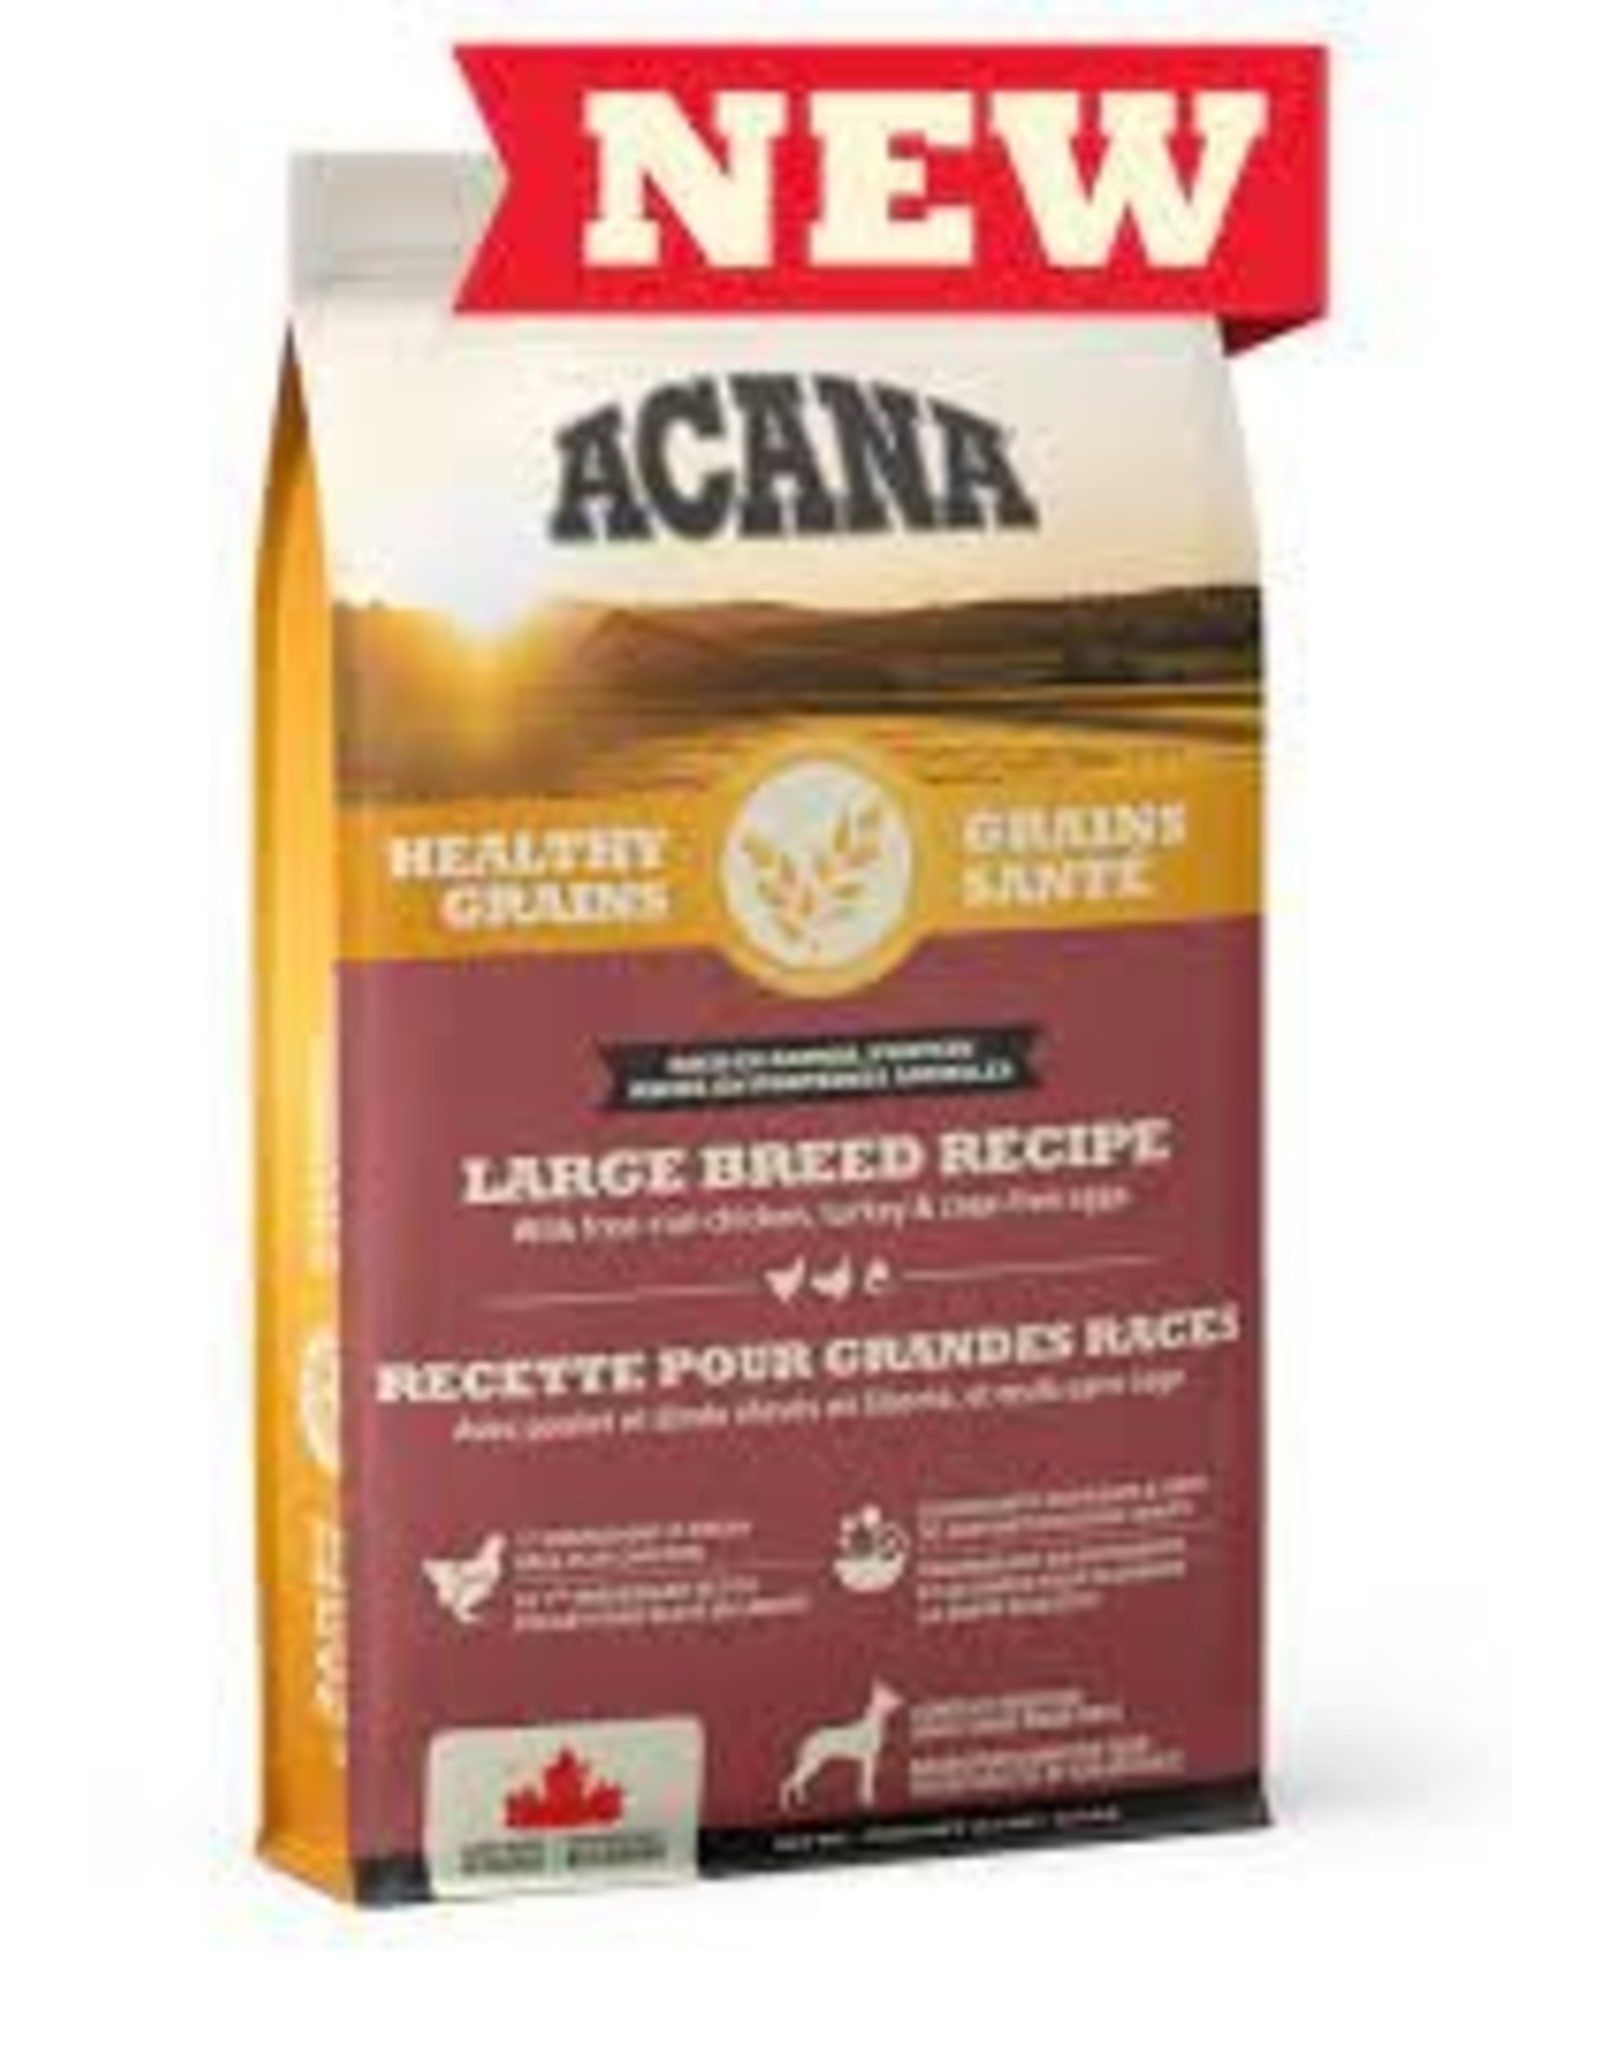 Acana Healthy Grains Large Breed Puppy